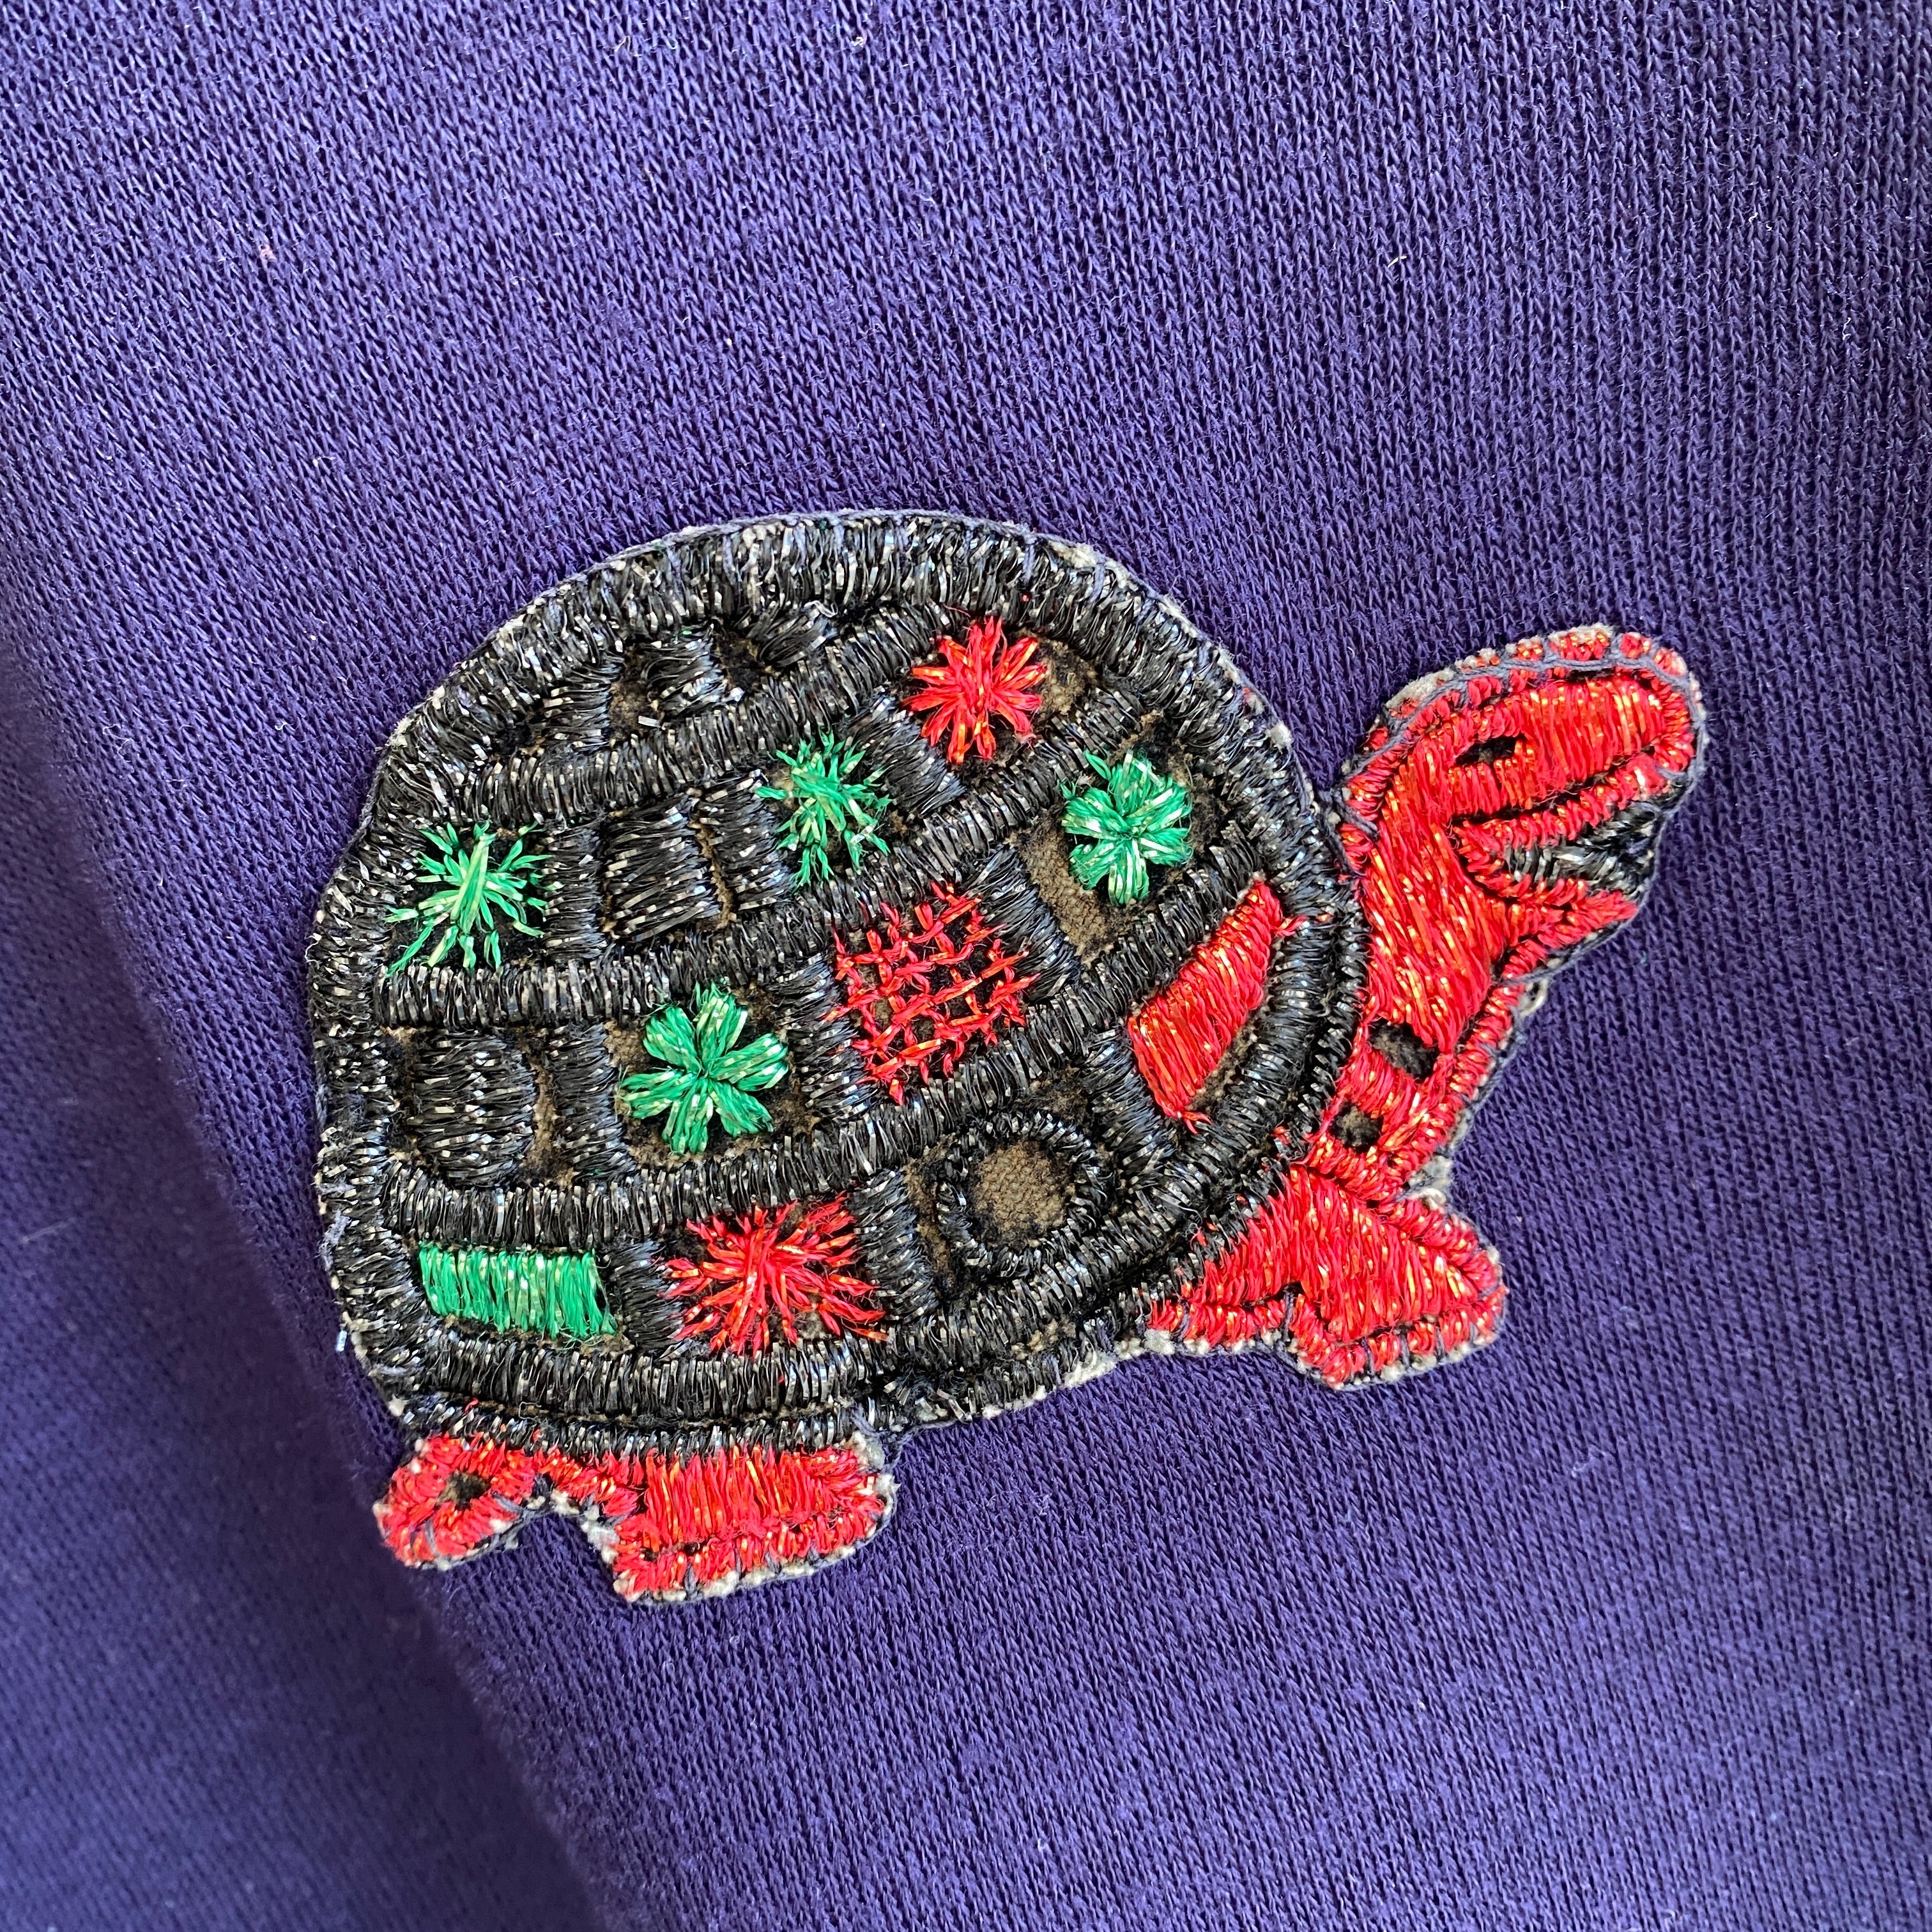 1970s REALLLLLLY Good Sparkly Turtle Contrast Stitching DIY Slouchy Sweatshirt